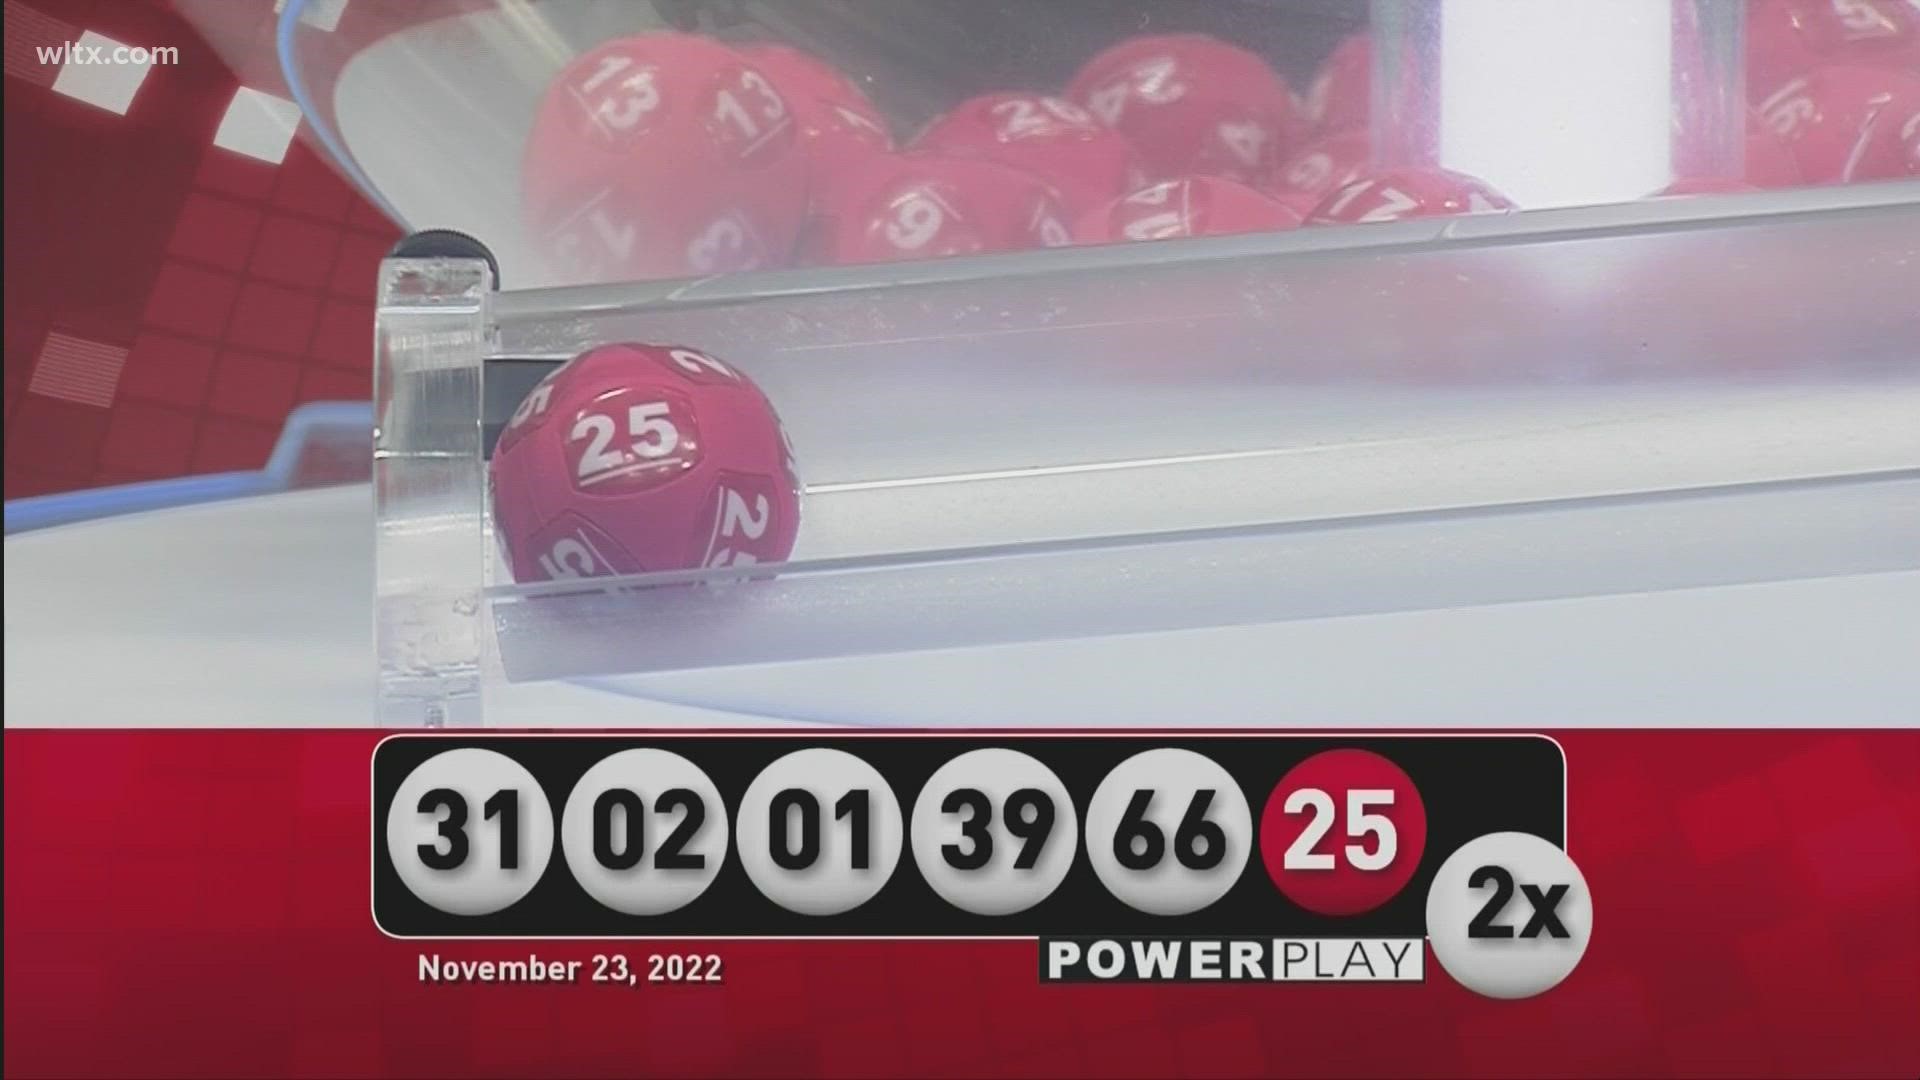 Here are the winning Powerball numbers for November 23, 2022.